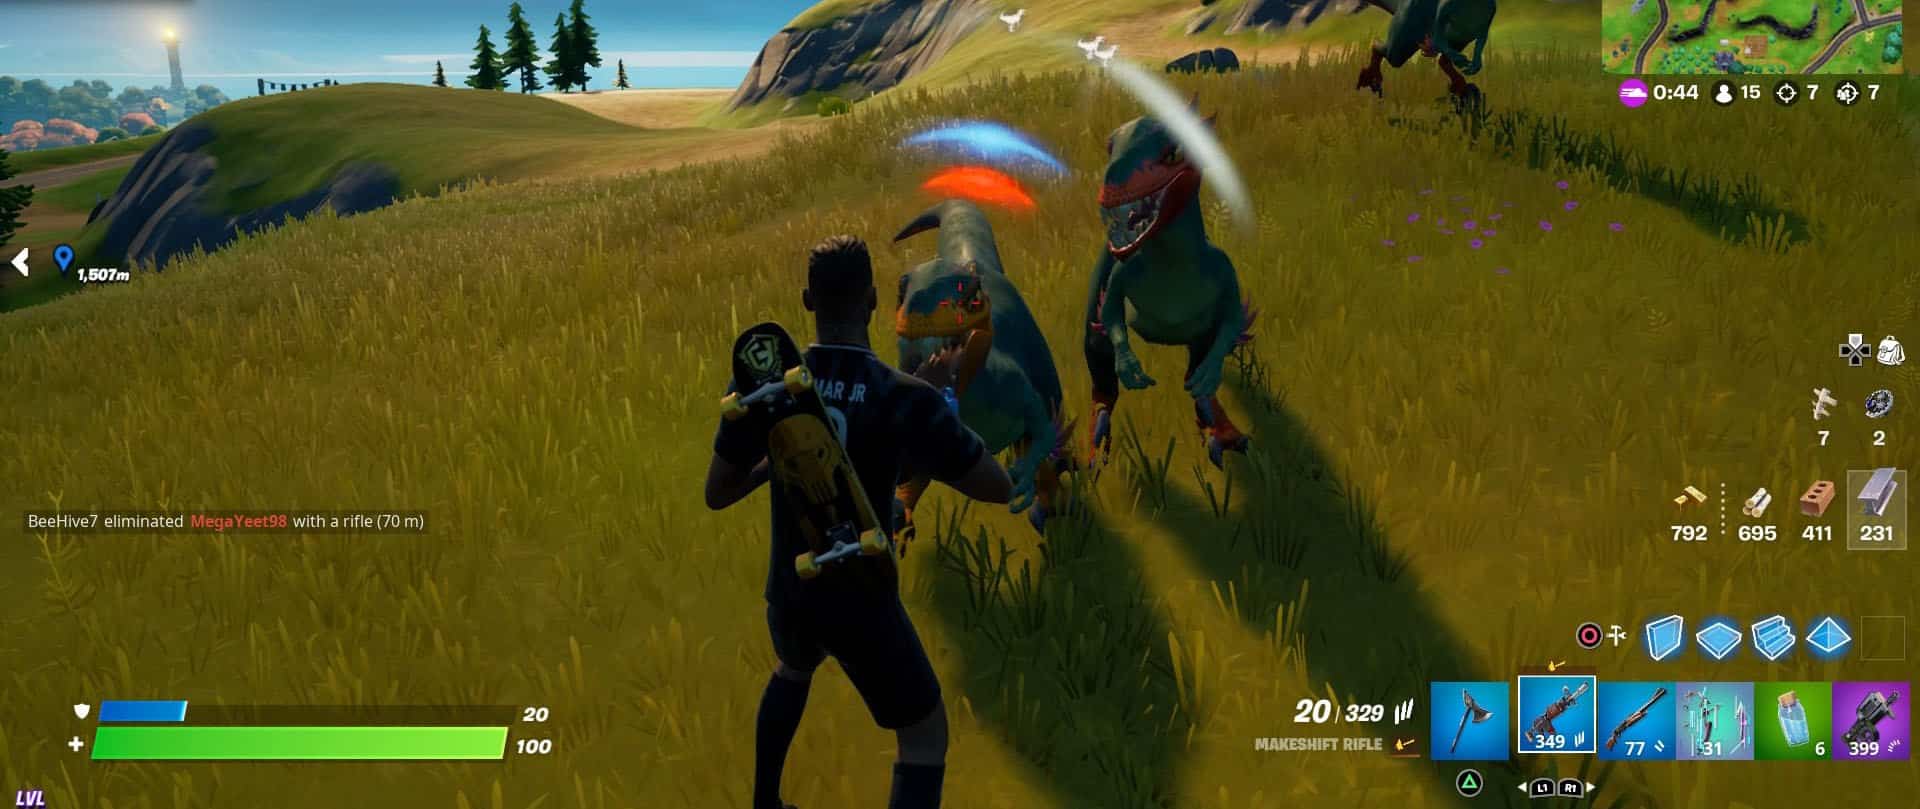 Fortnite Raptors attacking the player in group